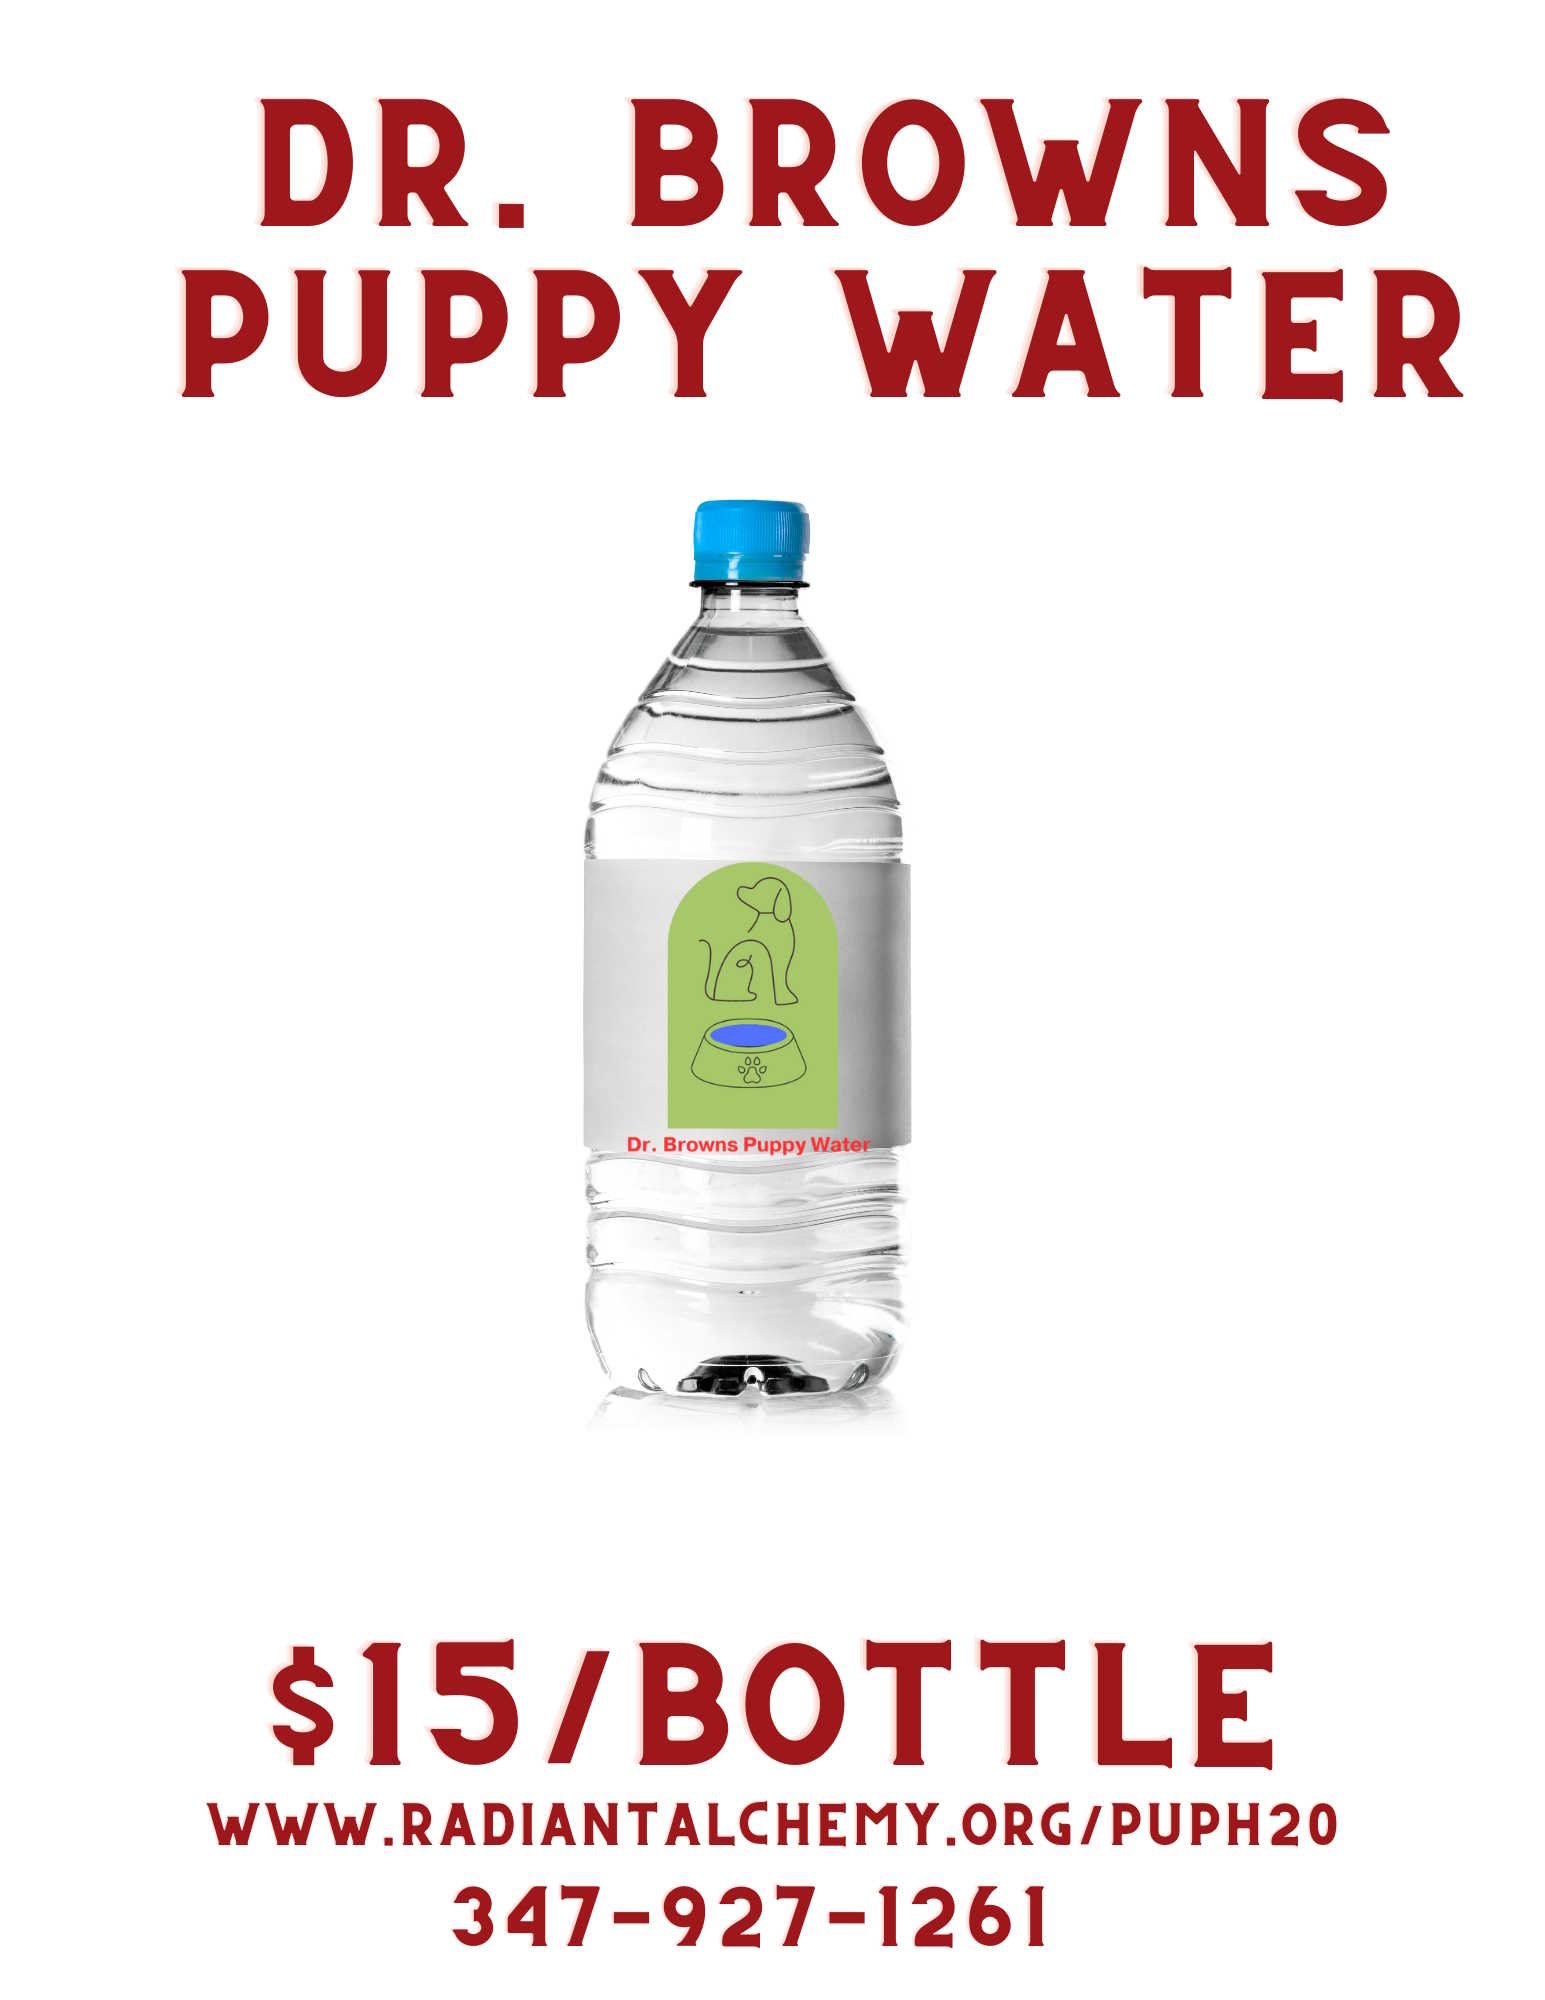 Dr. Browns Puppy Water